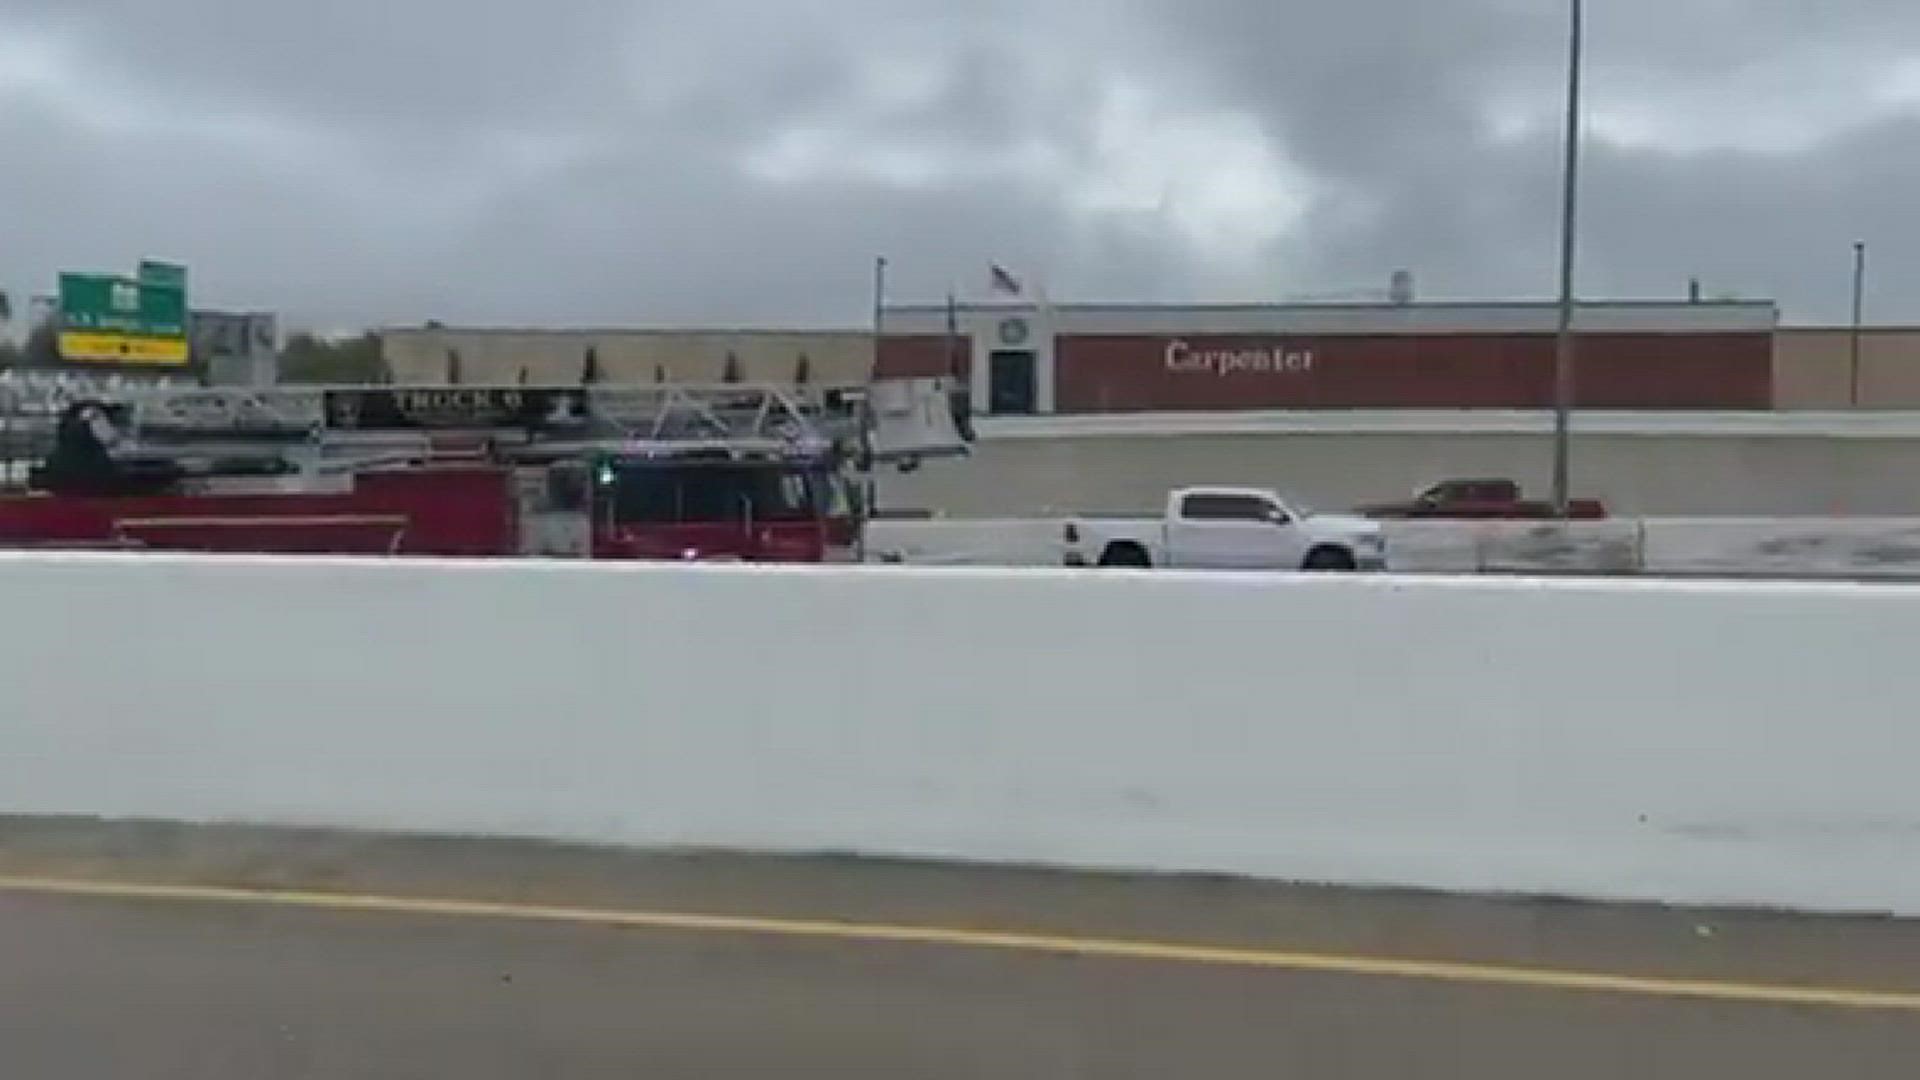 According to the Temple Police Department, the crash happened on southbound I-35 near Industrial Boulevard and Nugent Avenue.
Credit: Darron Wallace